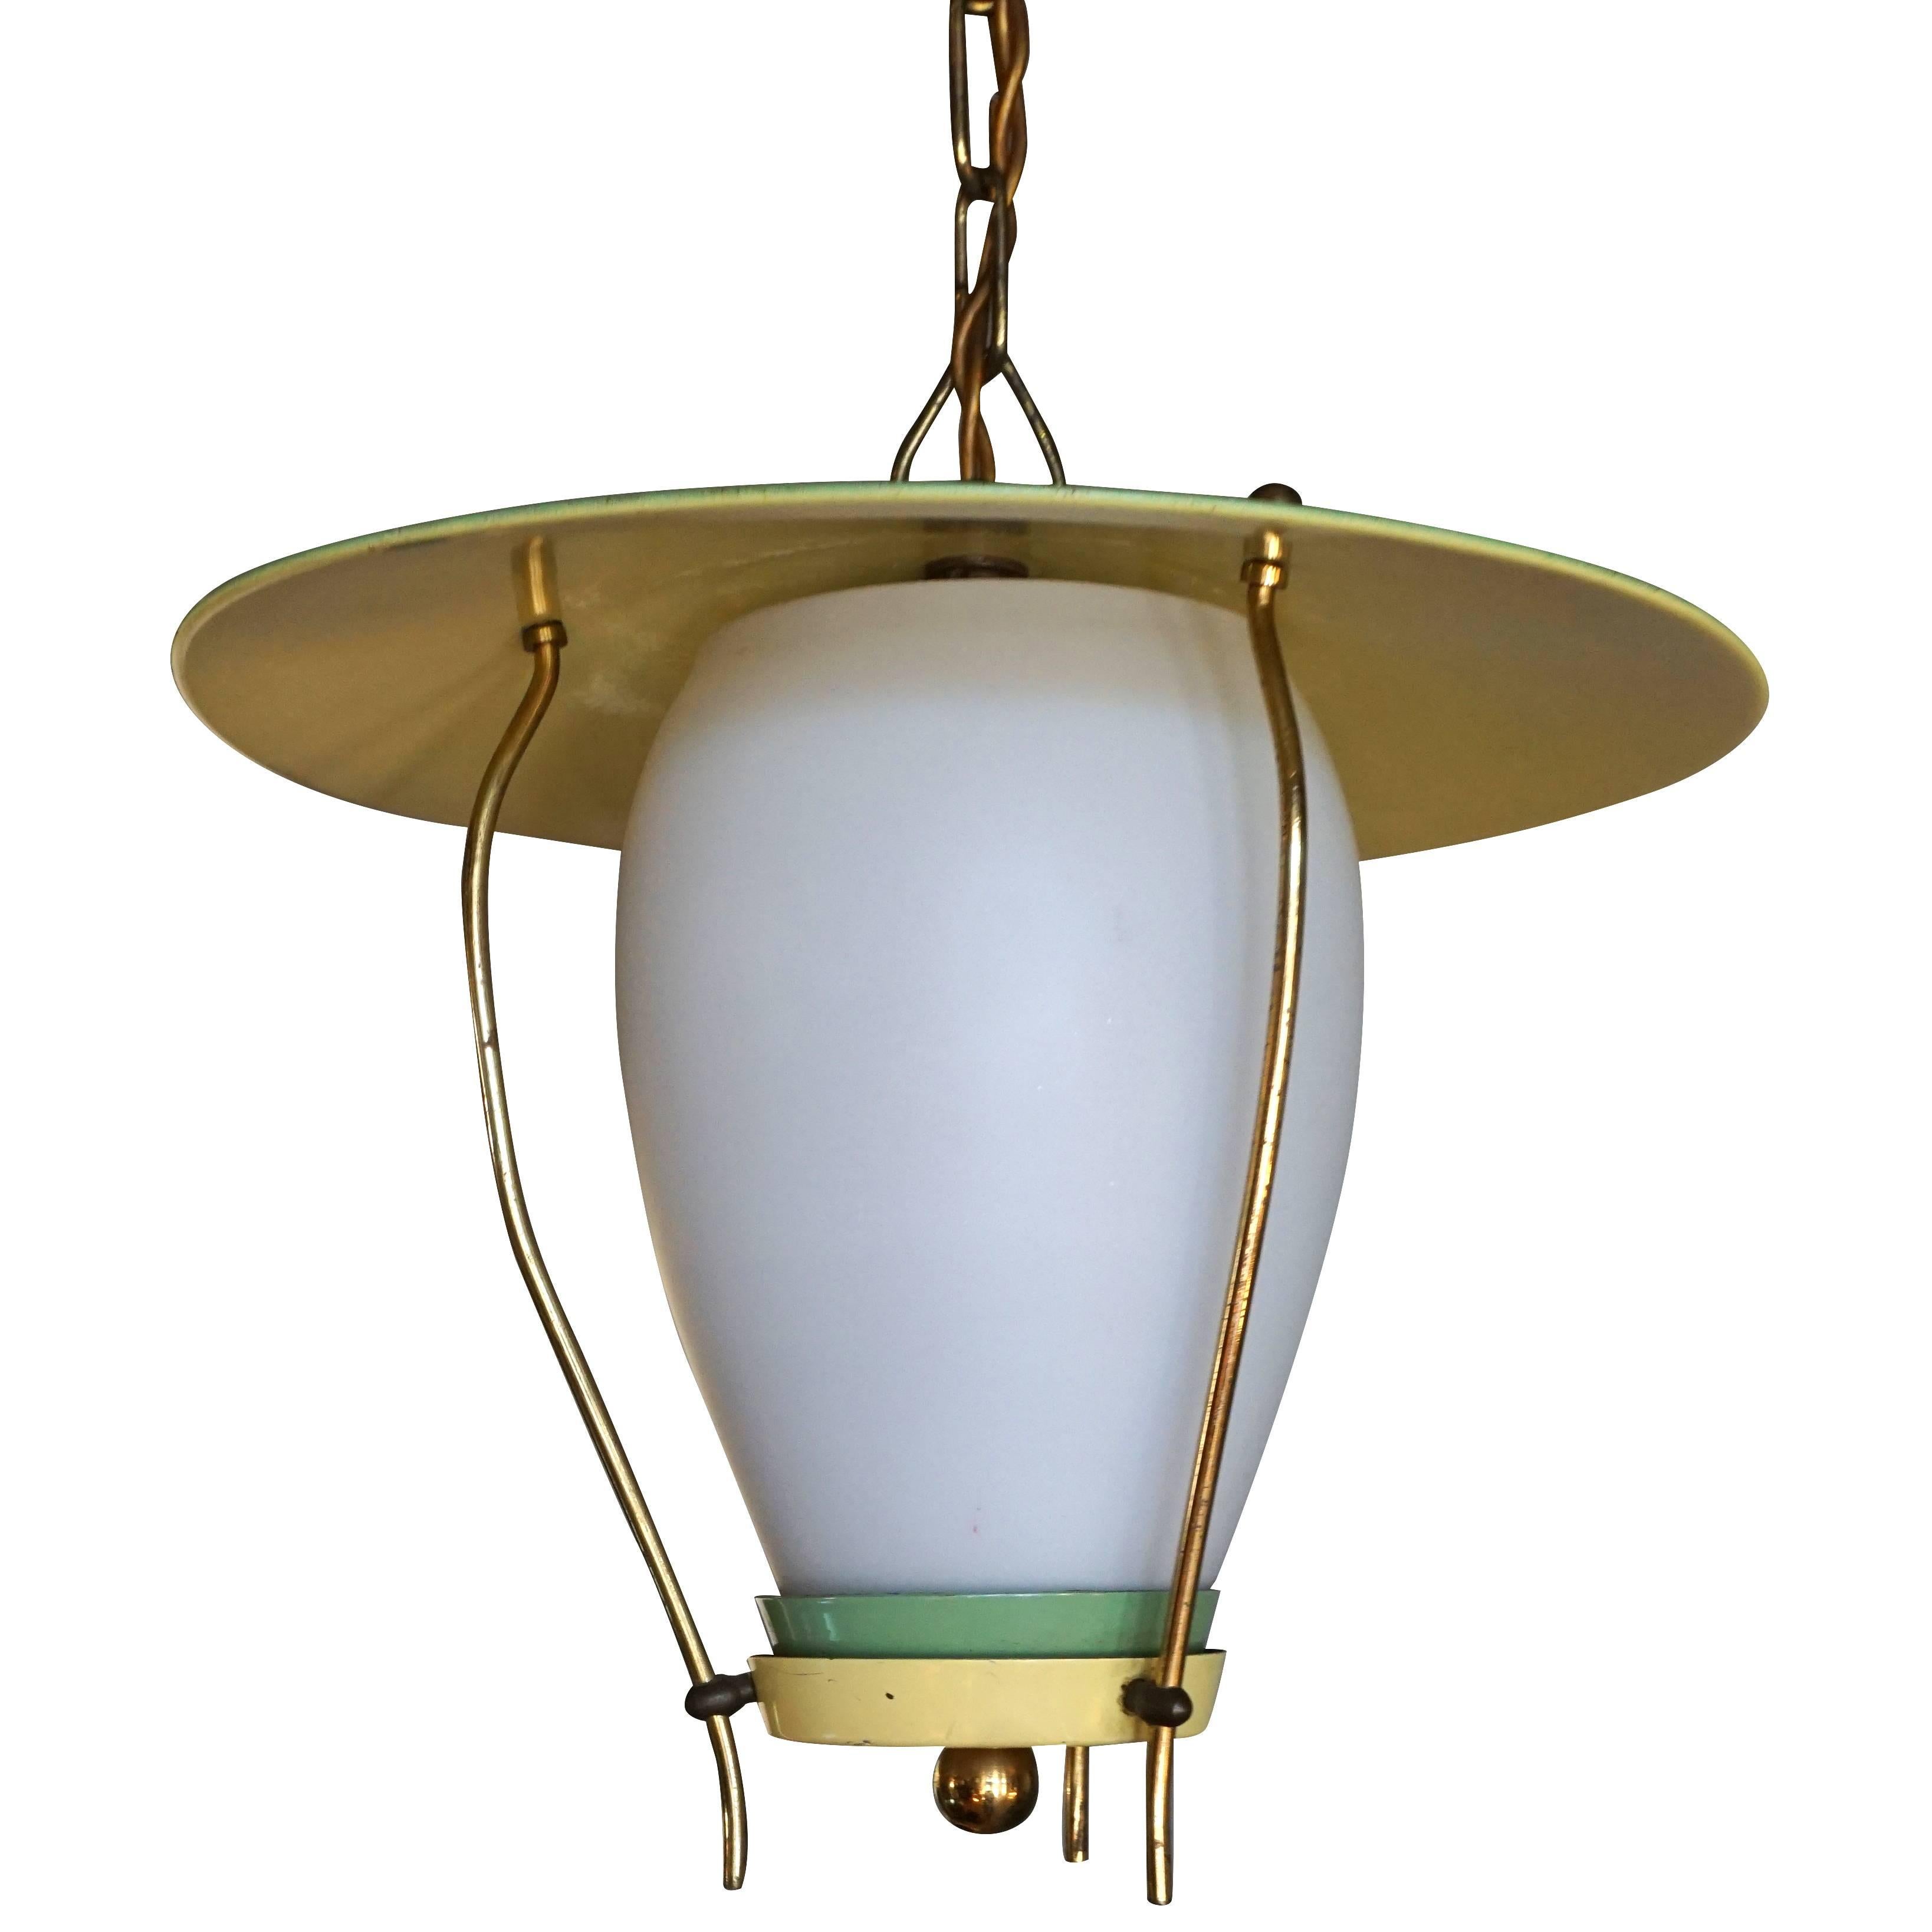 A small green, vintage Mid-Century Modern Italian hanging lantern, ceiling light made of hand crafted brass and metal with a half frosted opaline glass shade, featuring a one light socket, produced by Stilnovo in good condition. The wires have been